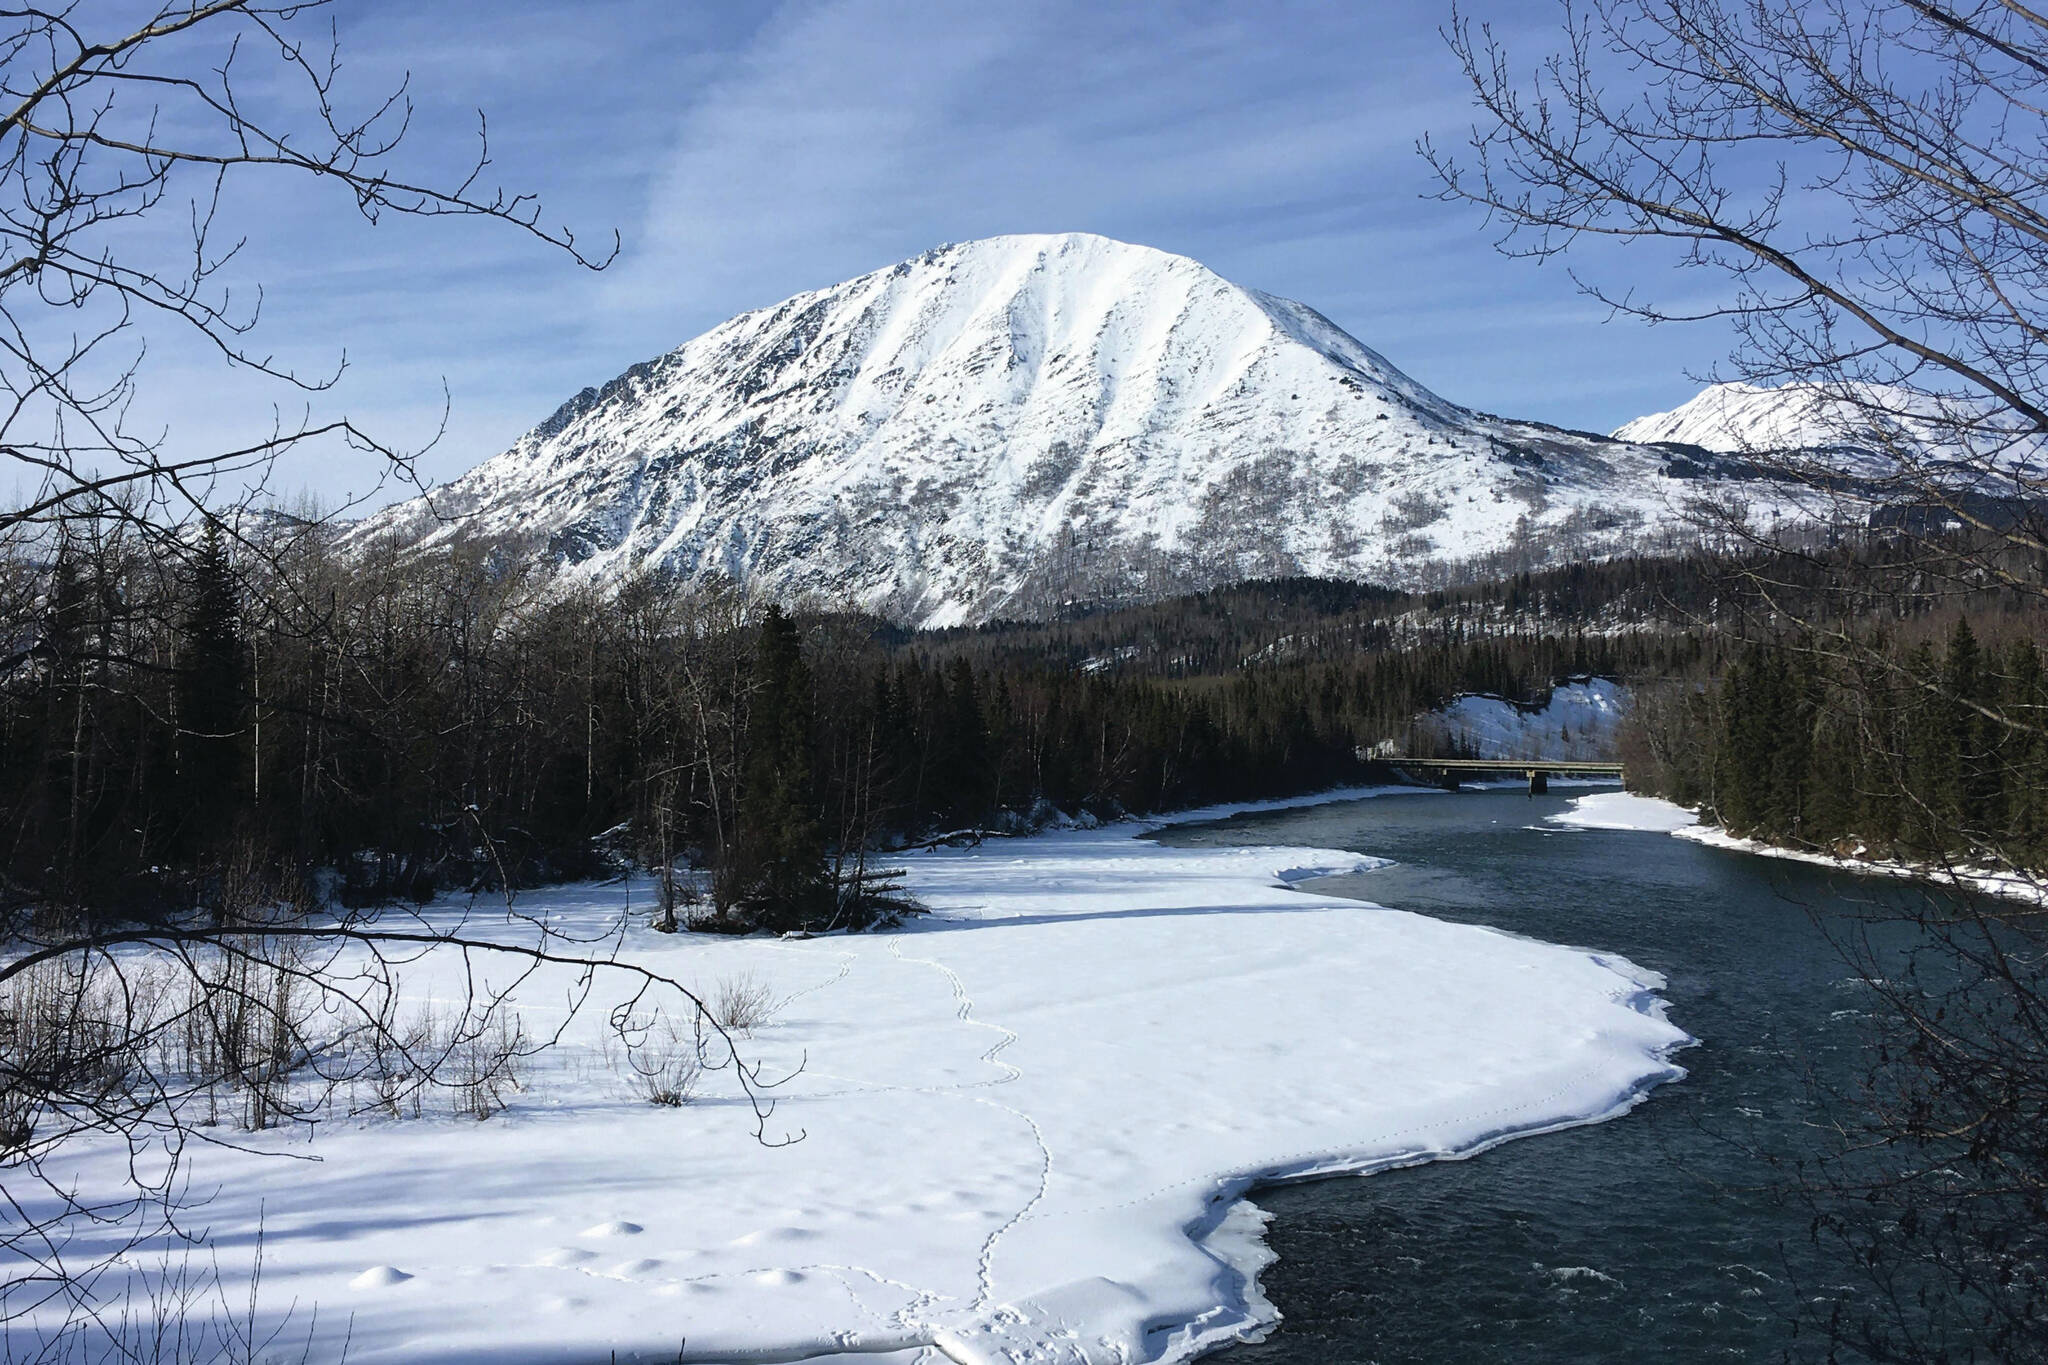 The Sterling Highway crosses the Kenai River near the Russian River Campground on March 15, 2020, near Cooper Landing, Alaska. (Jeff Helminiak/Peninsula Clarion)